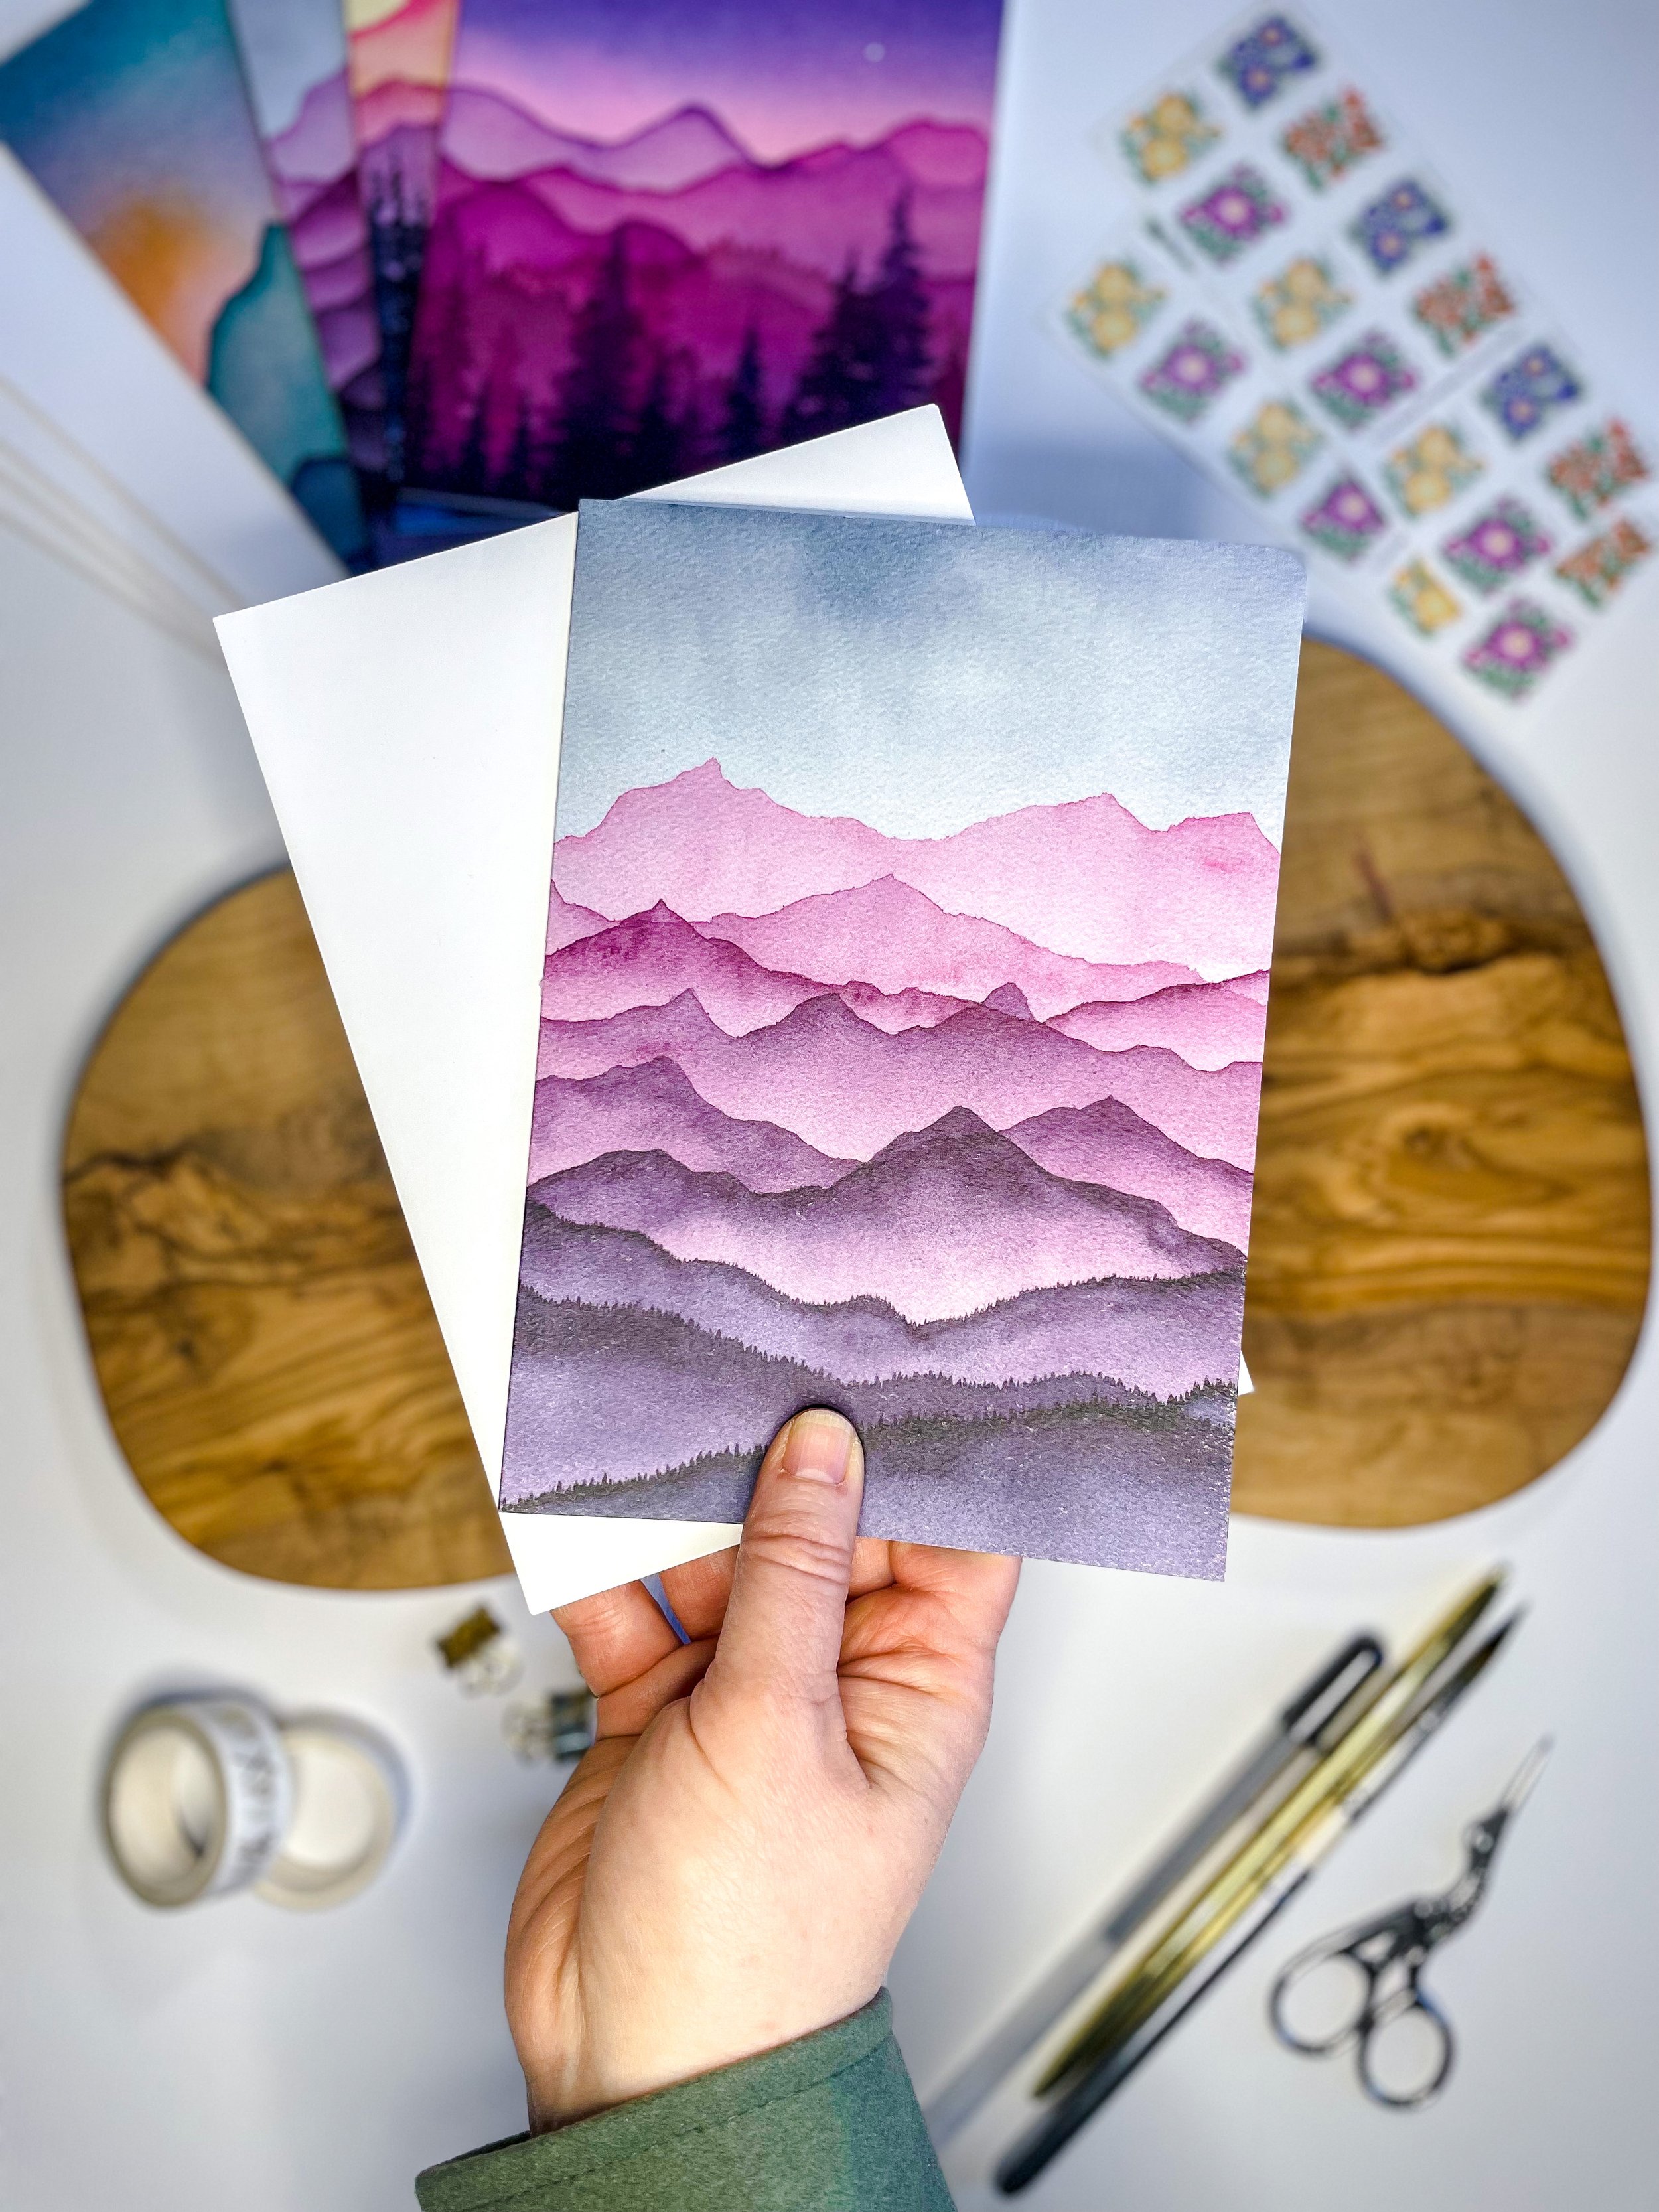 Colorful Mountain Peaks 5 Blank Cards With Envelopes Blank